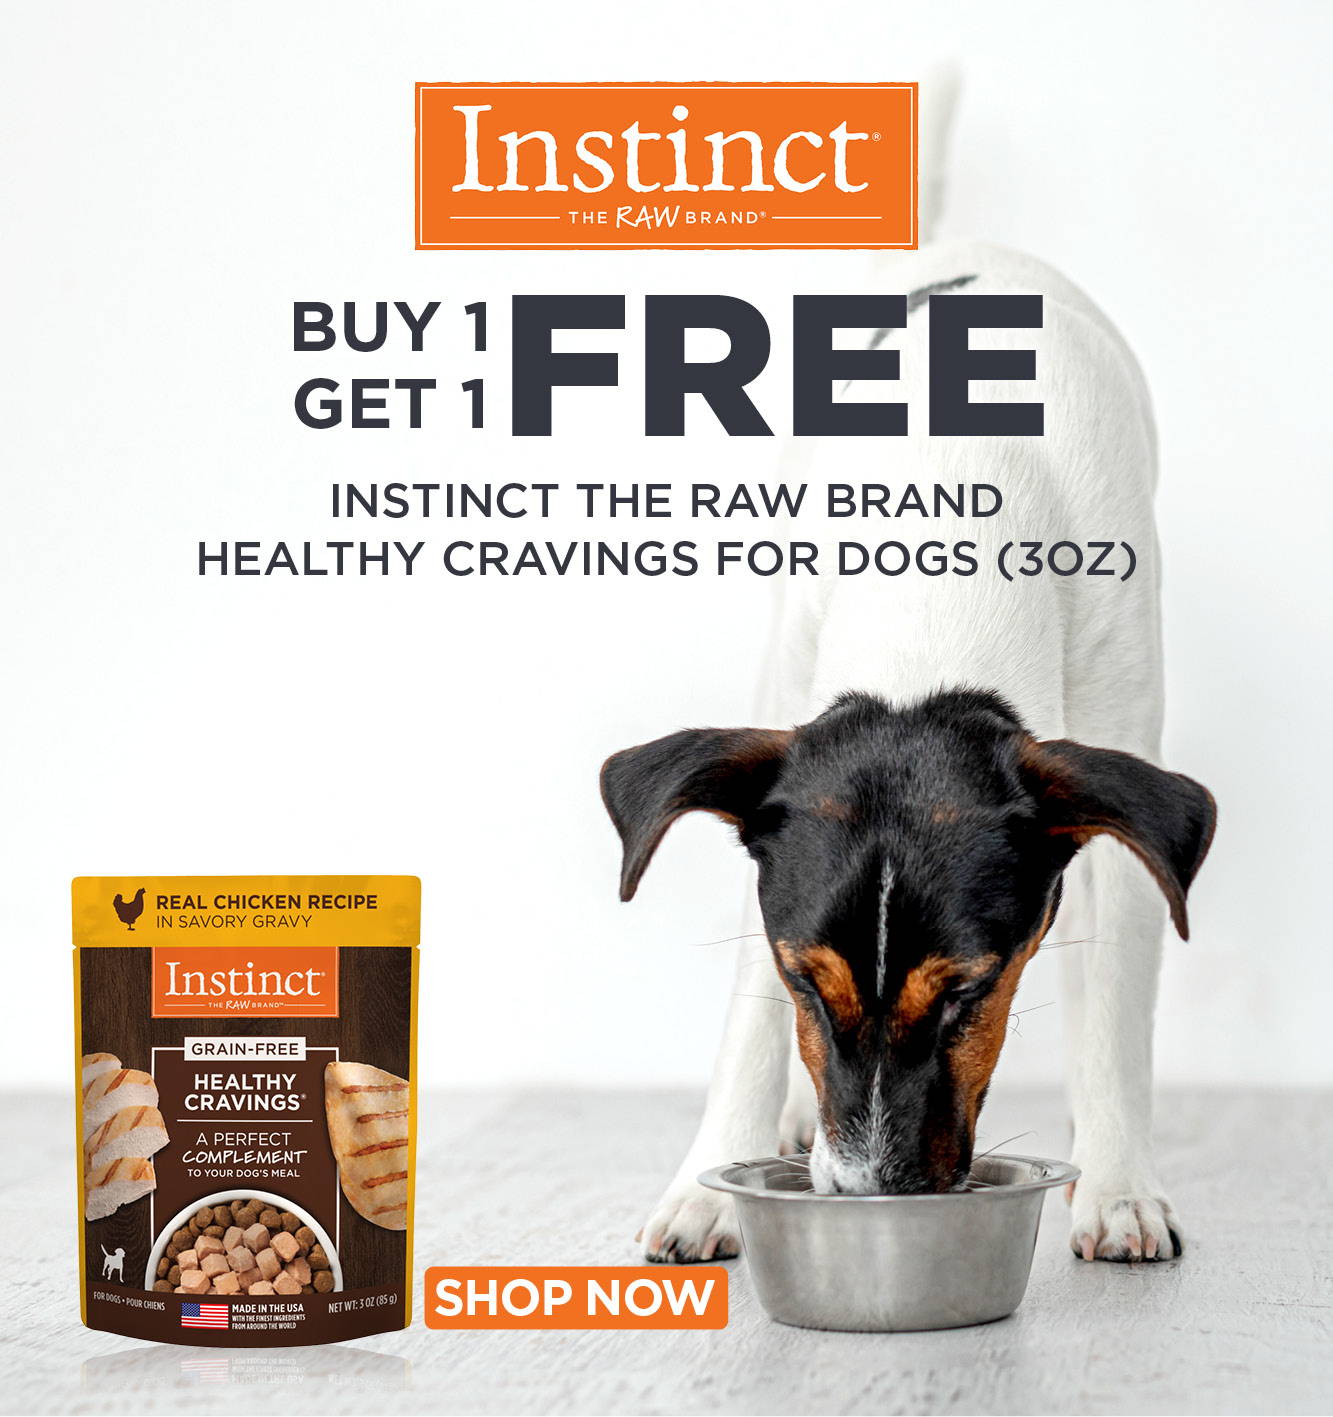 Buy 1, get 1 free Instinct The Raw Brand Healthy Cravings for Dogs (3 oz)